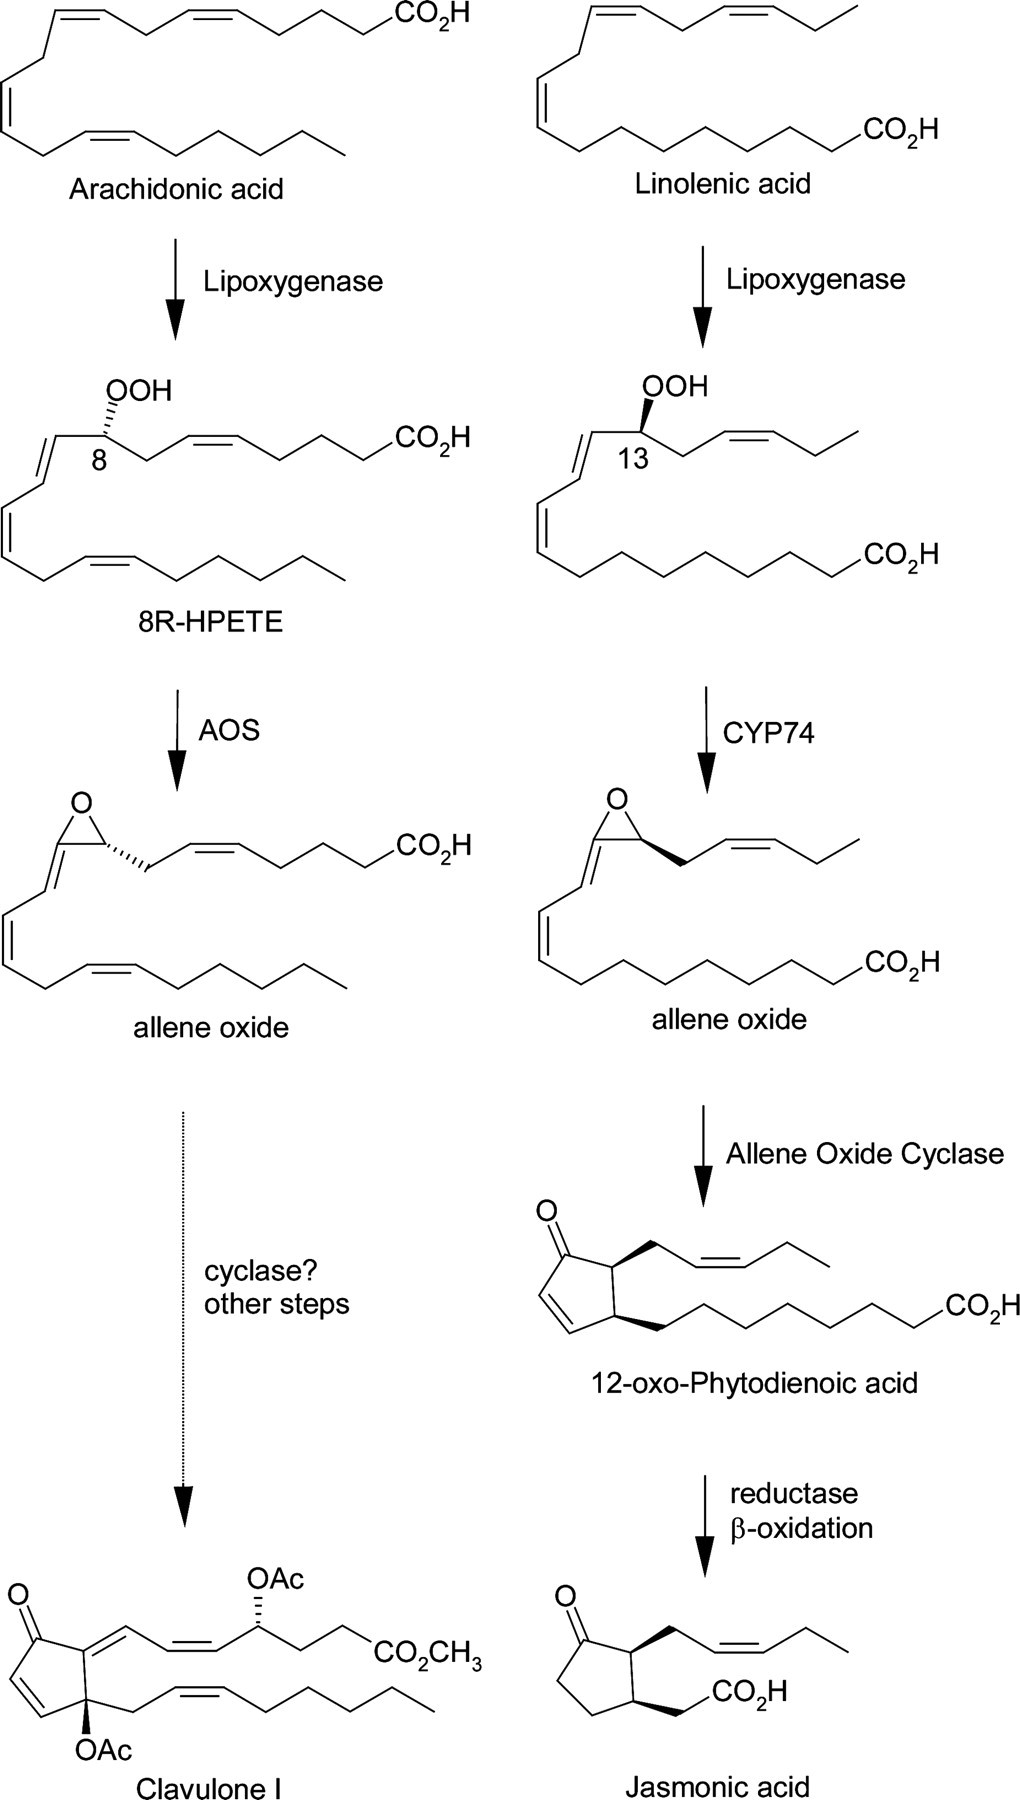 Comparison  of allene oxide biosynthesis in coral and plants